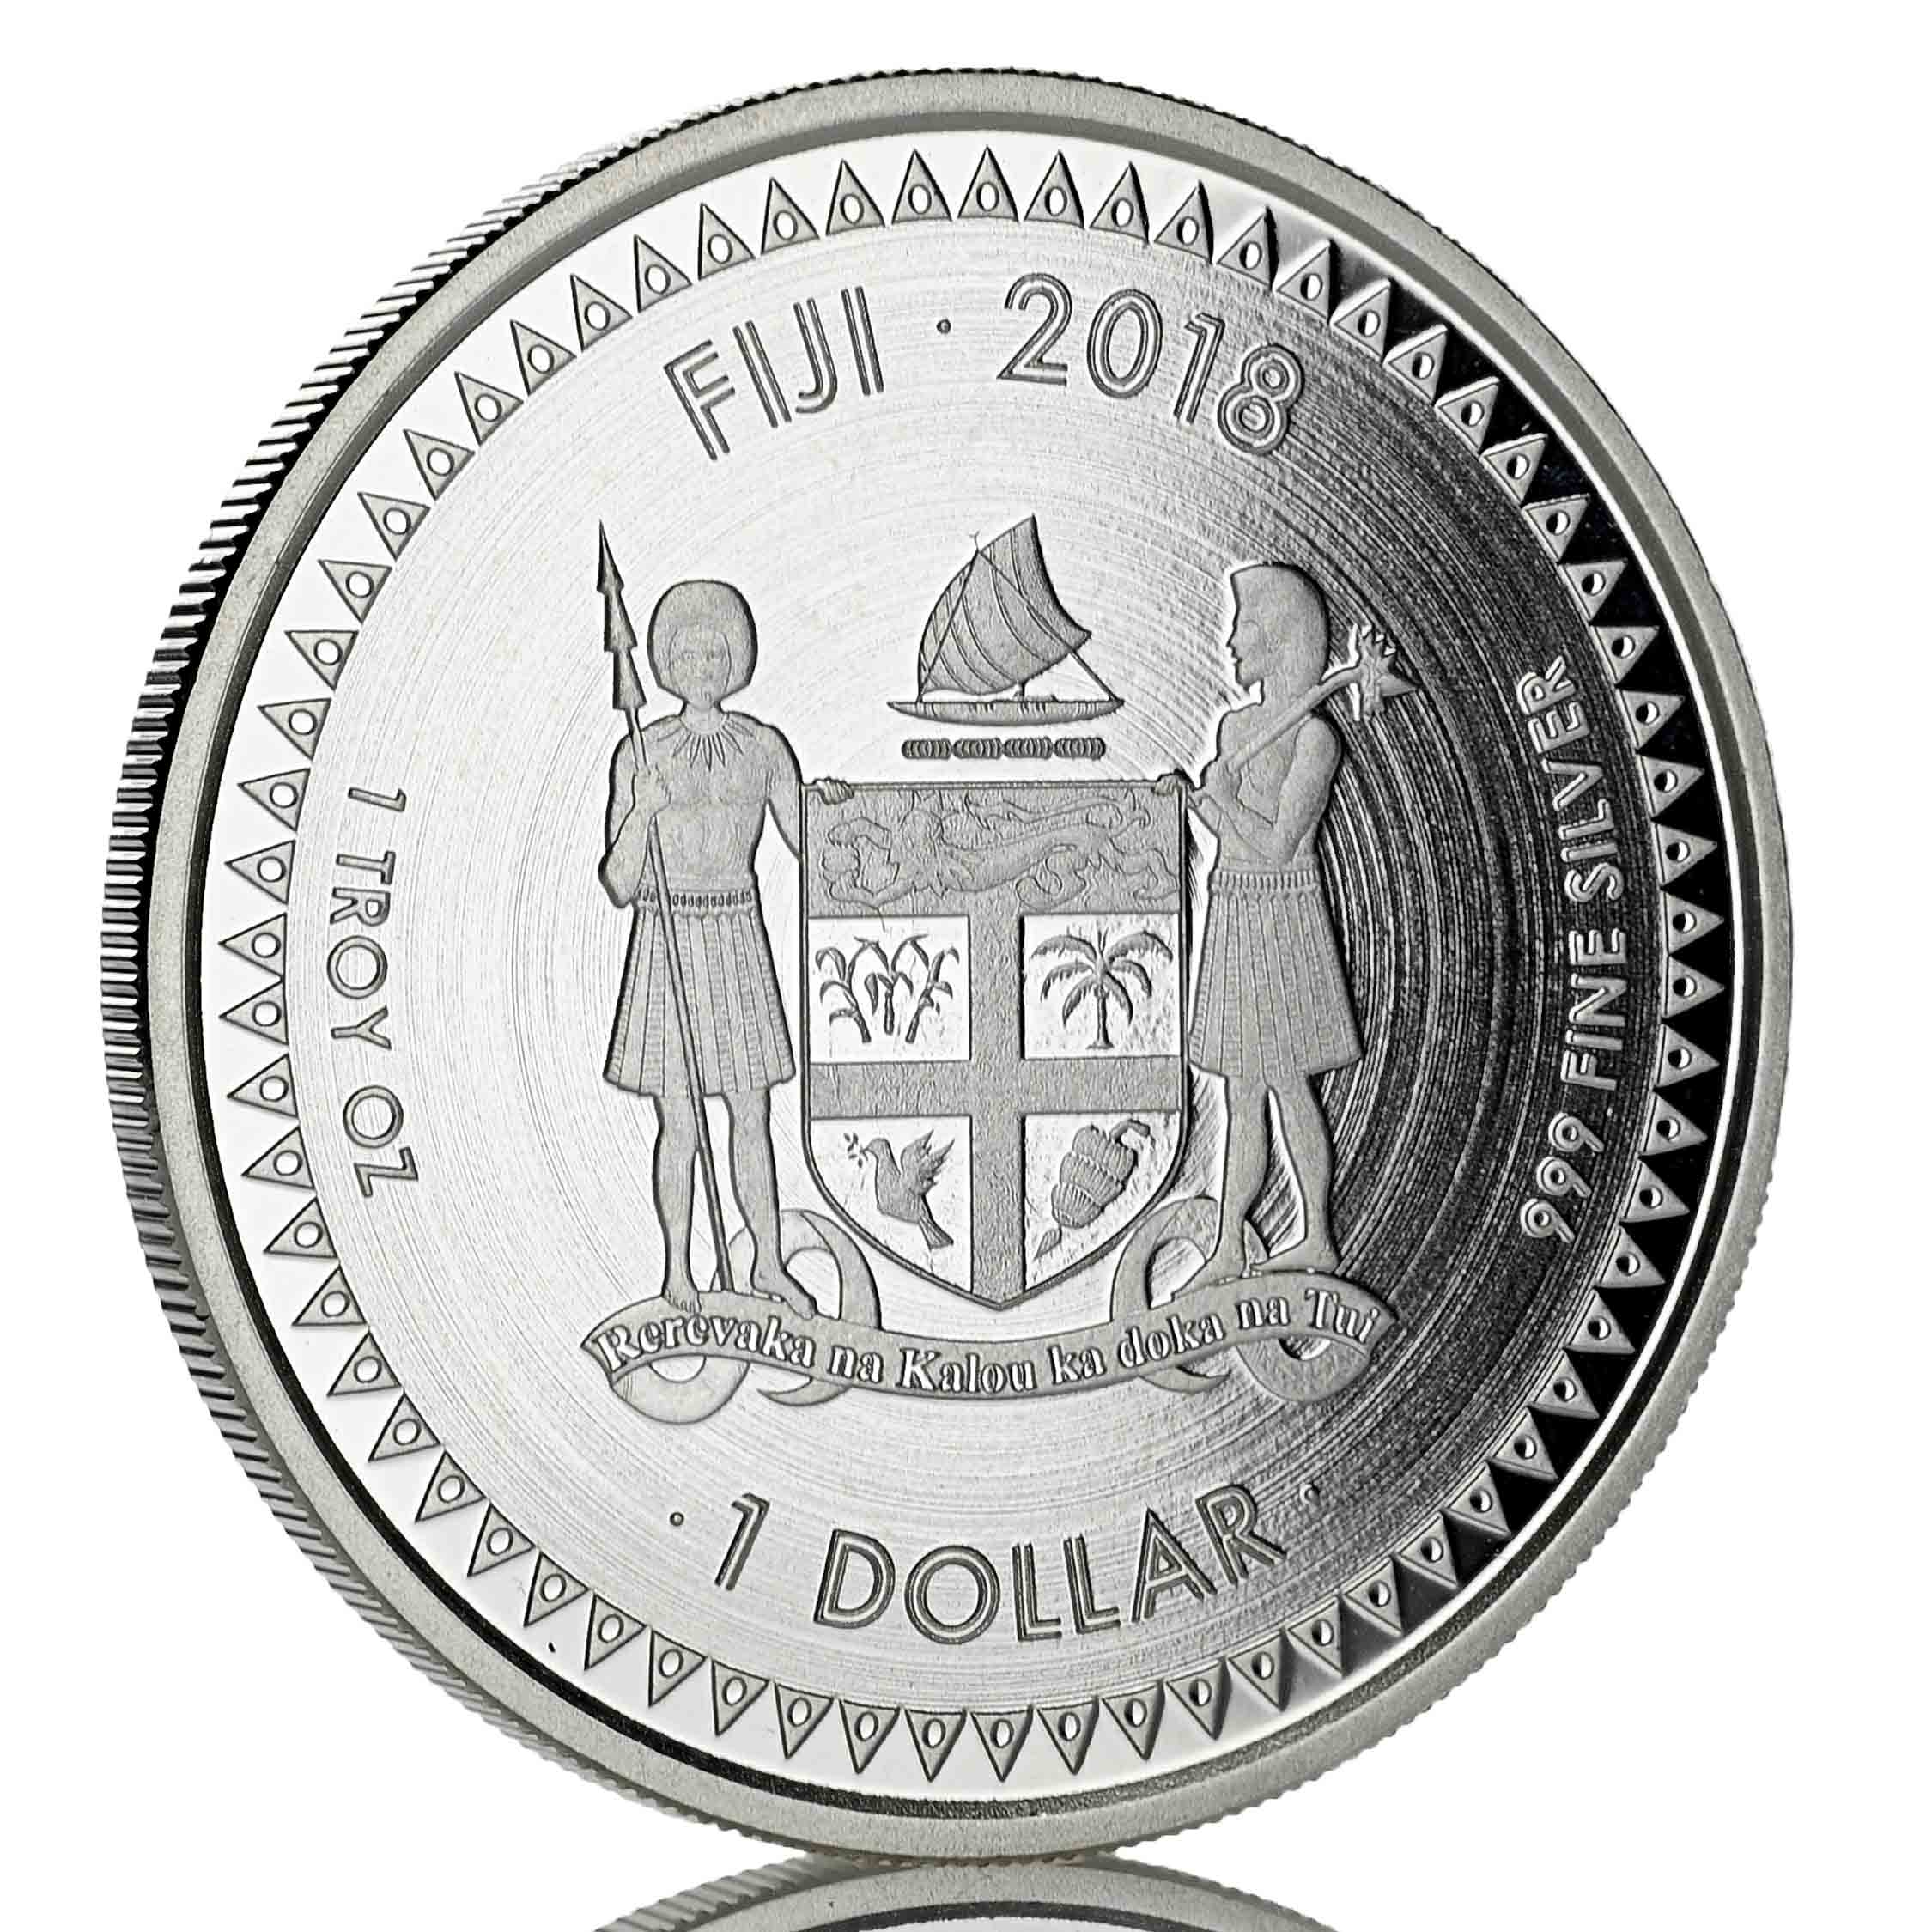 Details about   2018 Fiji PACIFIC DOLLAR $1 silver BU coin .999 fine silver